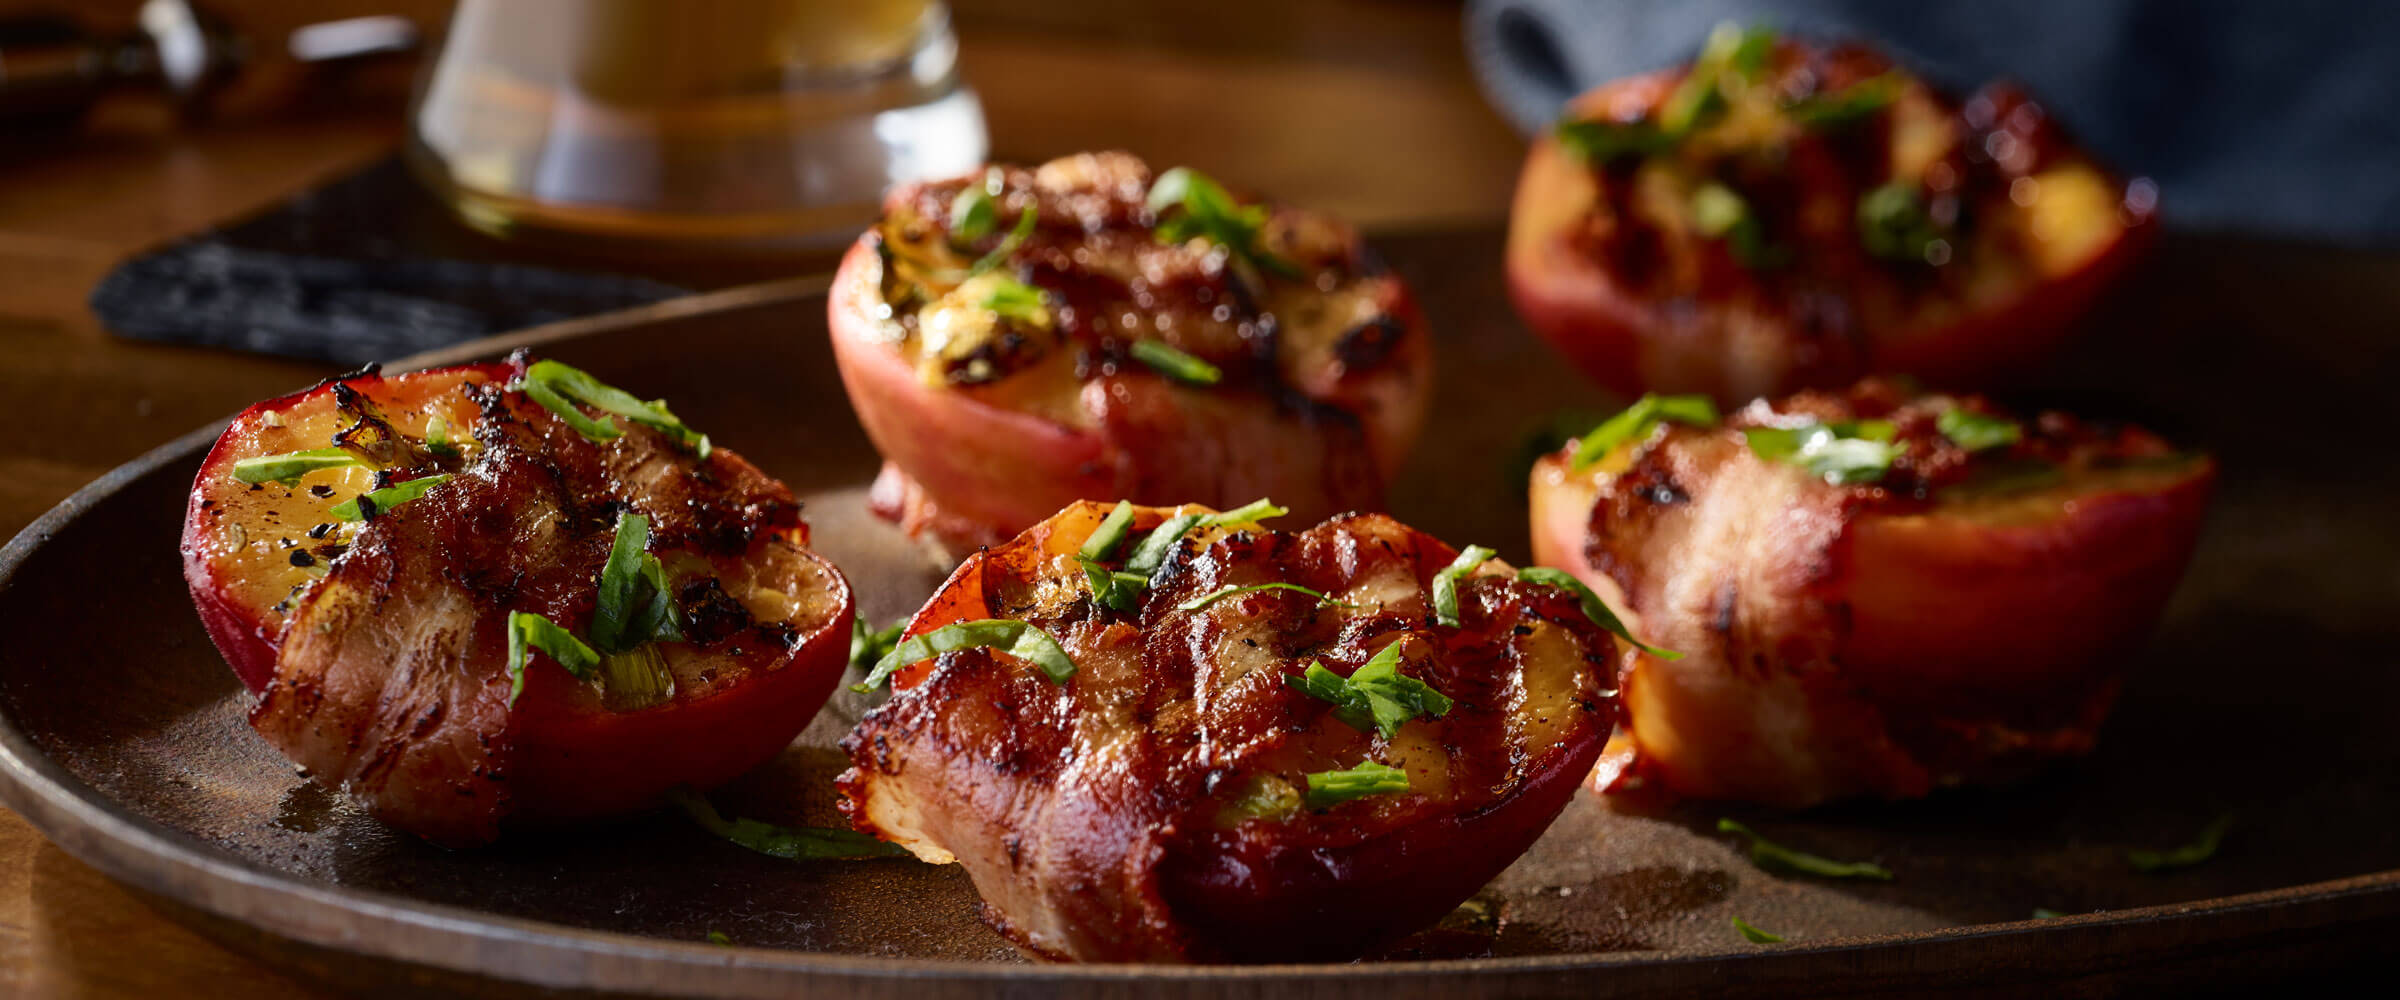 Bacon Wrapped Peaches topped with garnish on brown plate